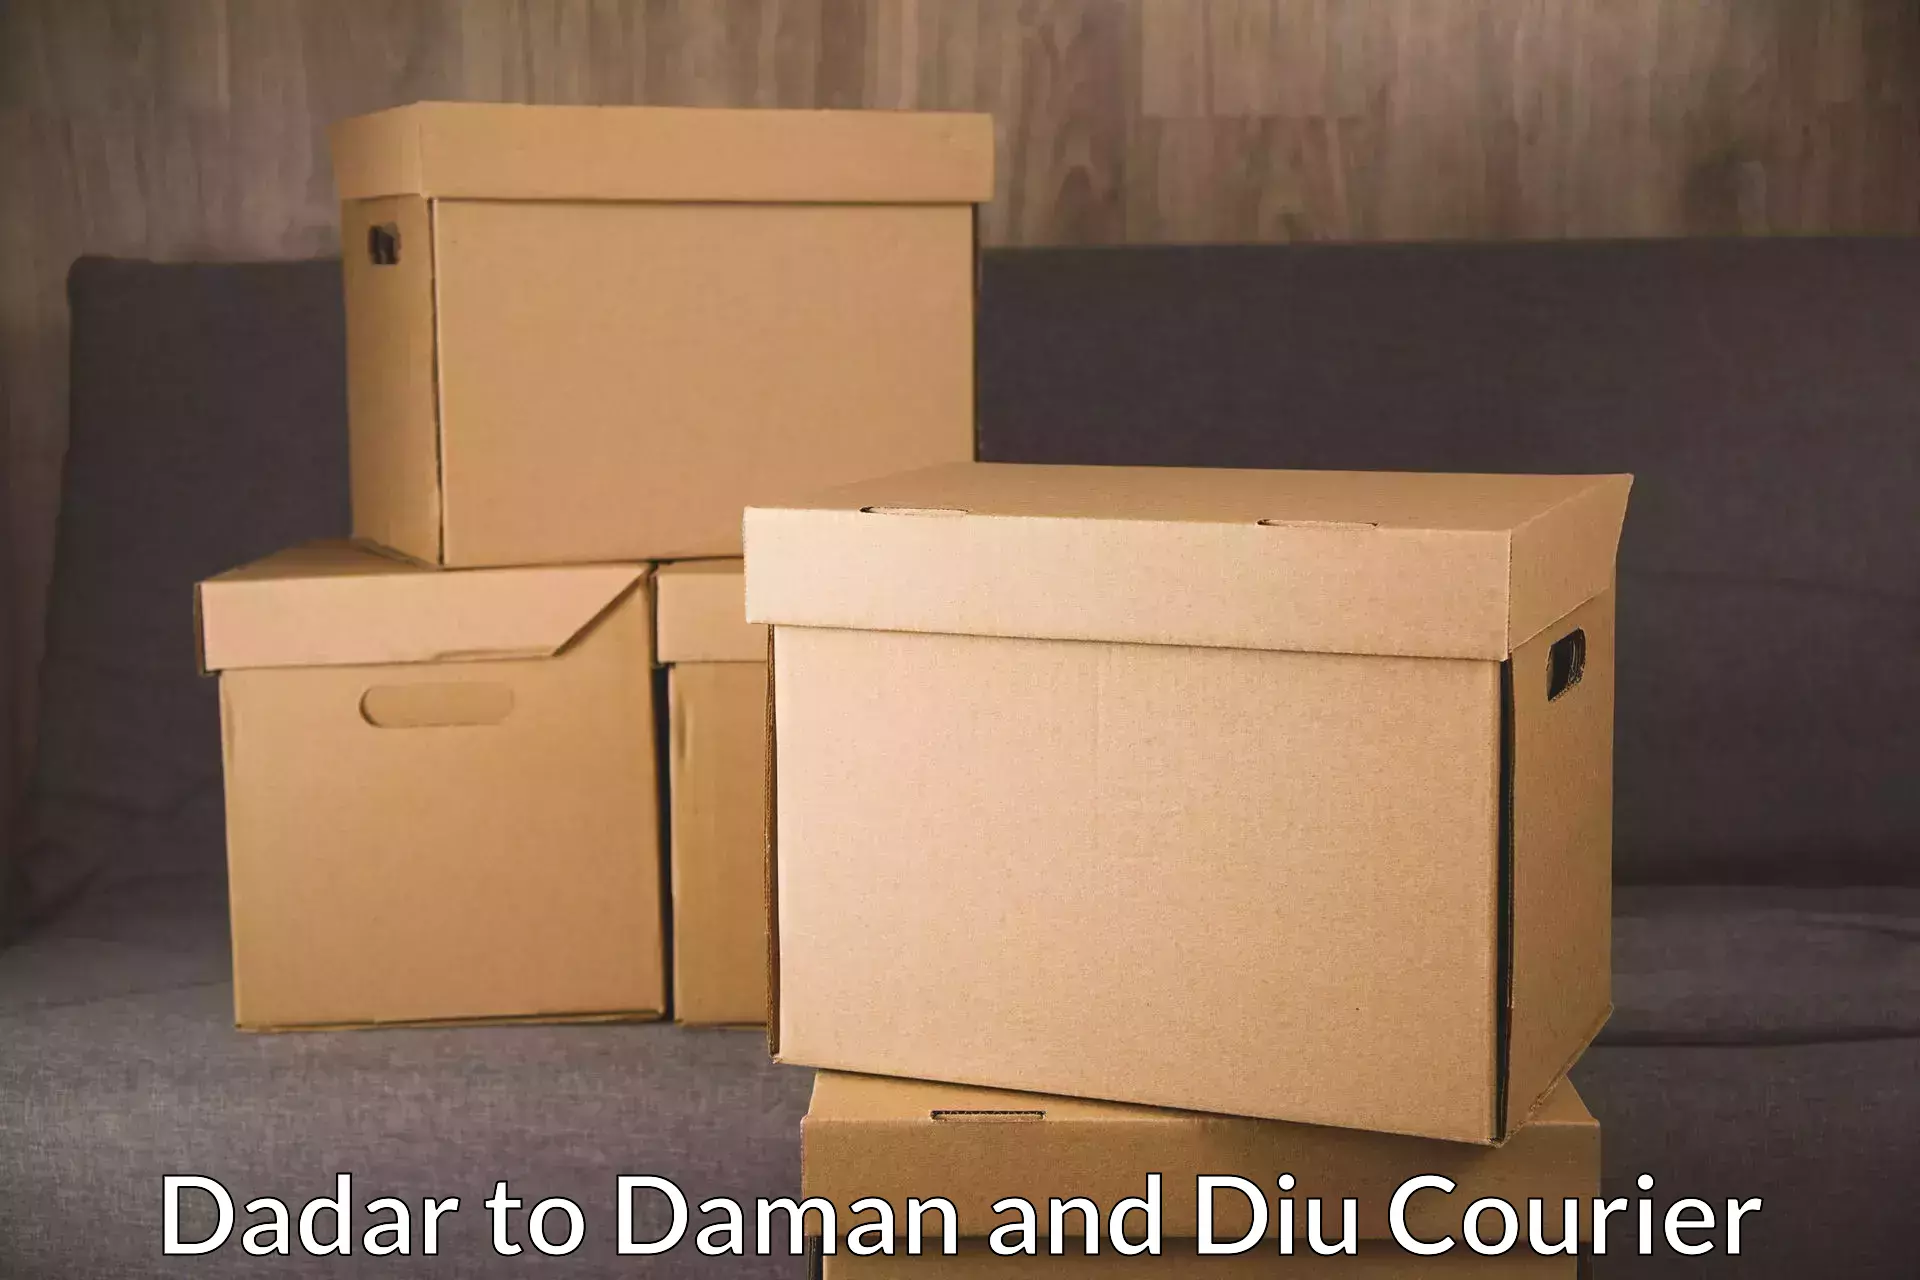 Same-day delivery solutions Dadar to Daman and Diu